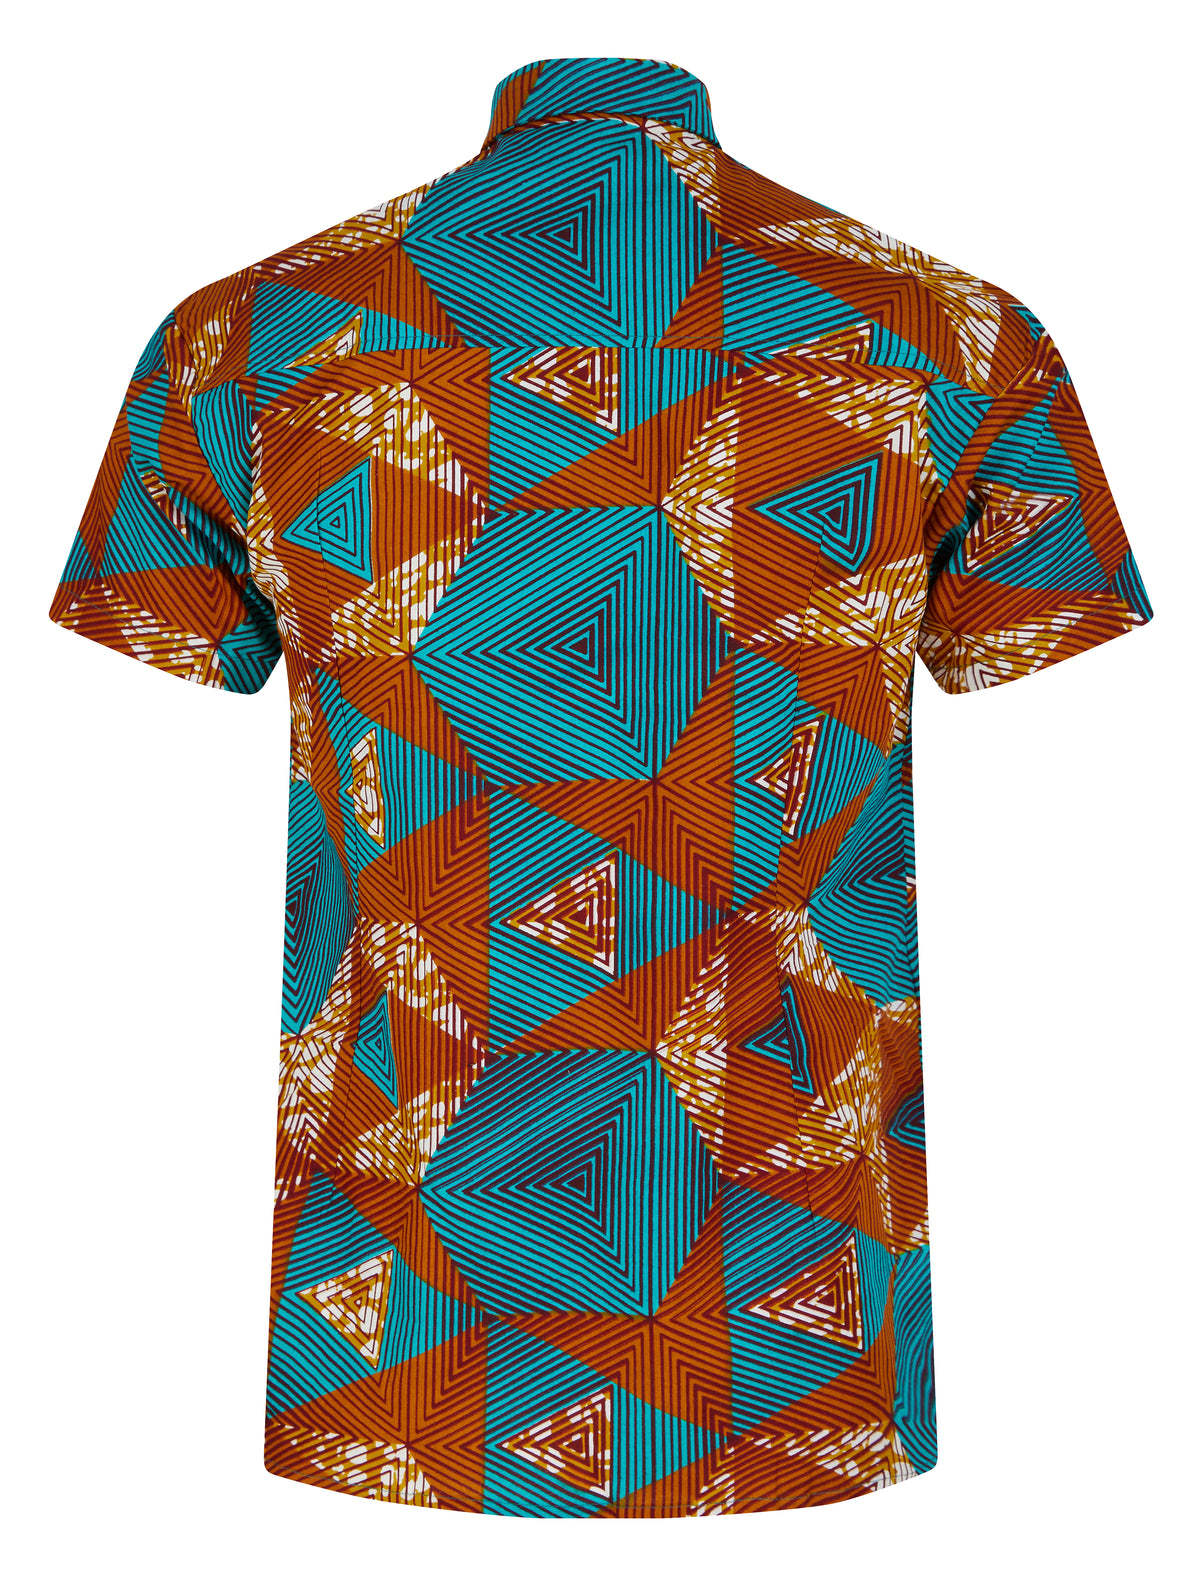 Men's SS African print shirt- Labyrinth - OHEMA OHENE AFRICAN INSPIRED FASHION